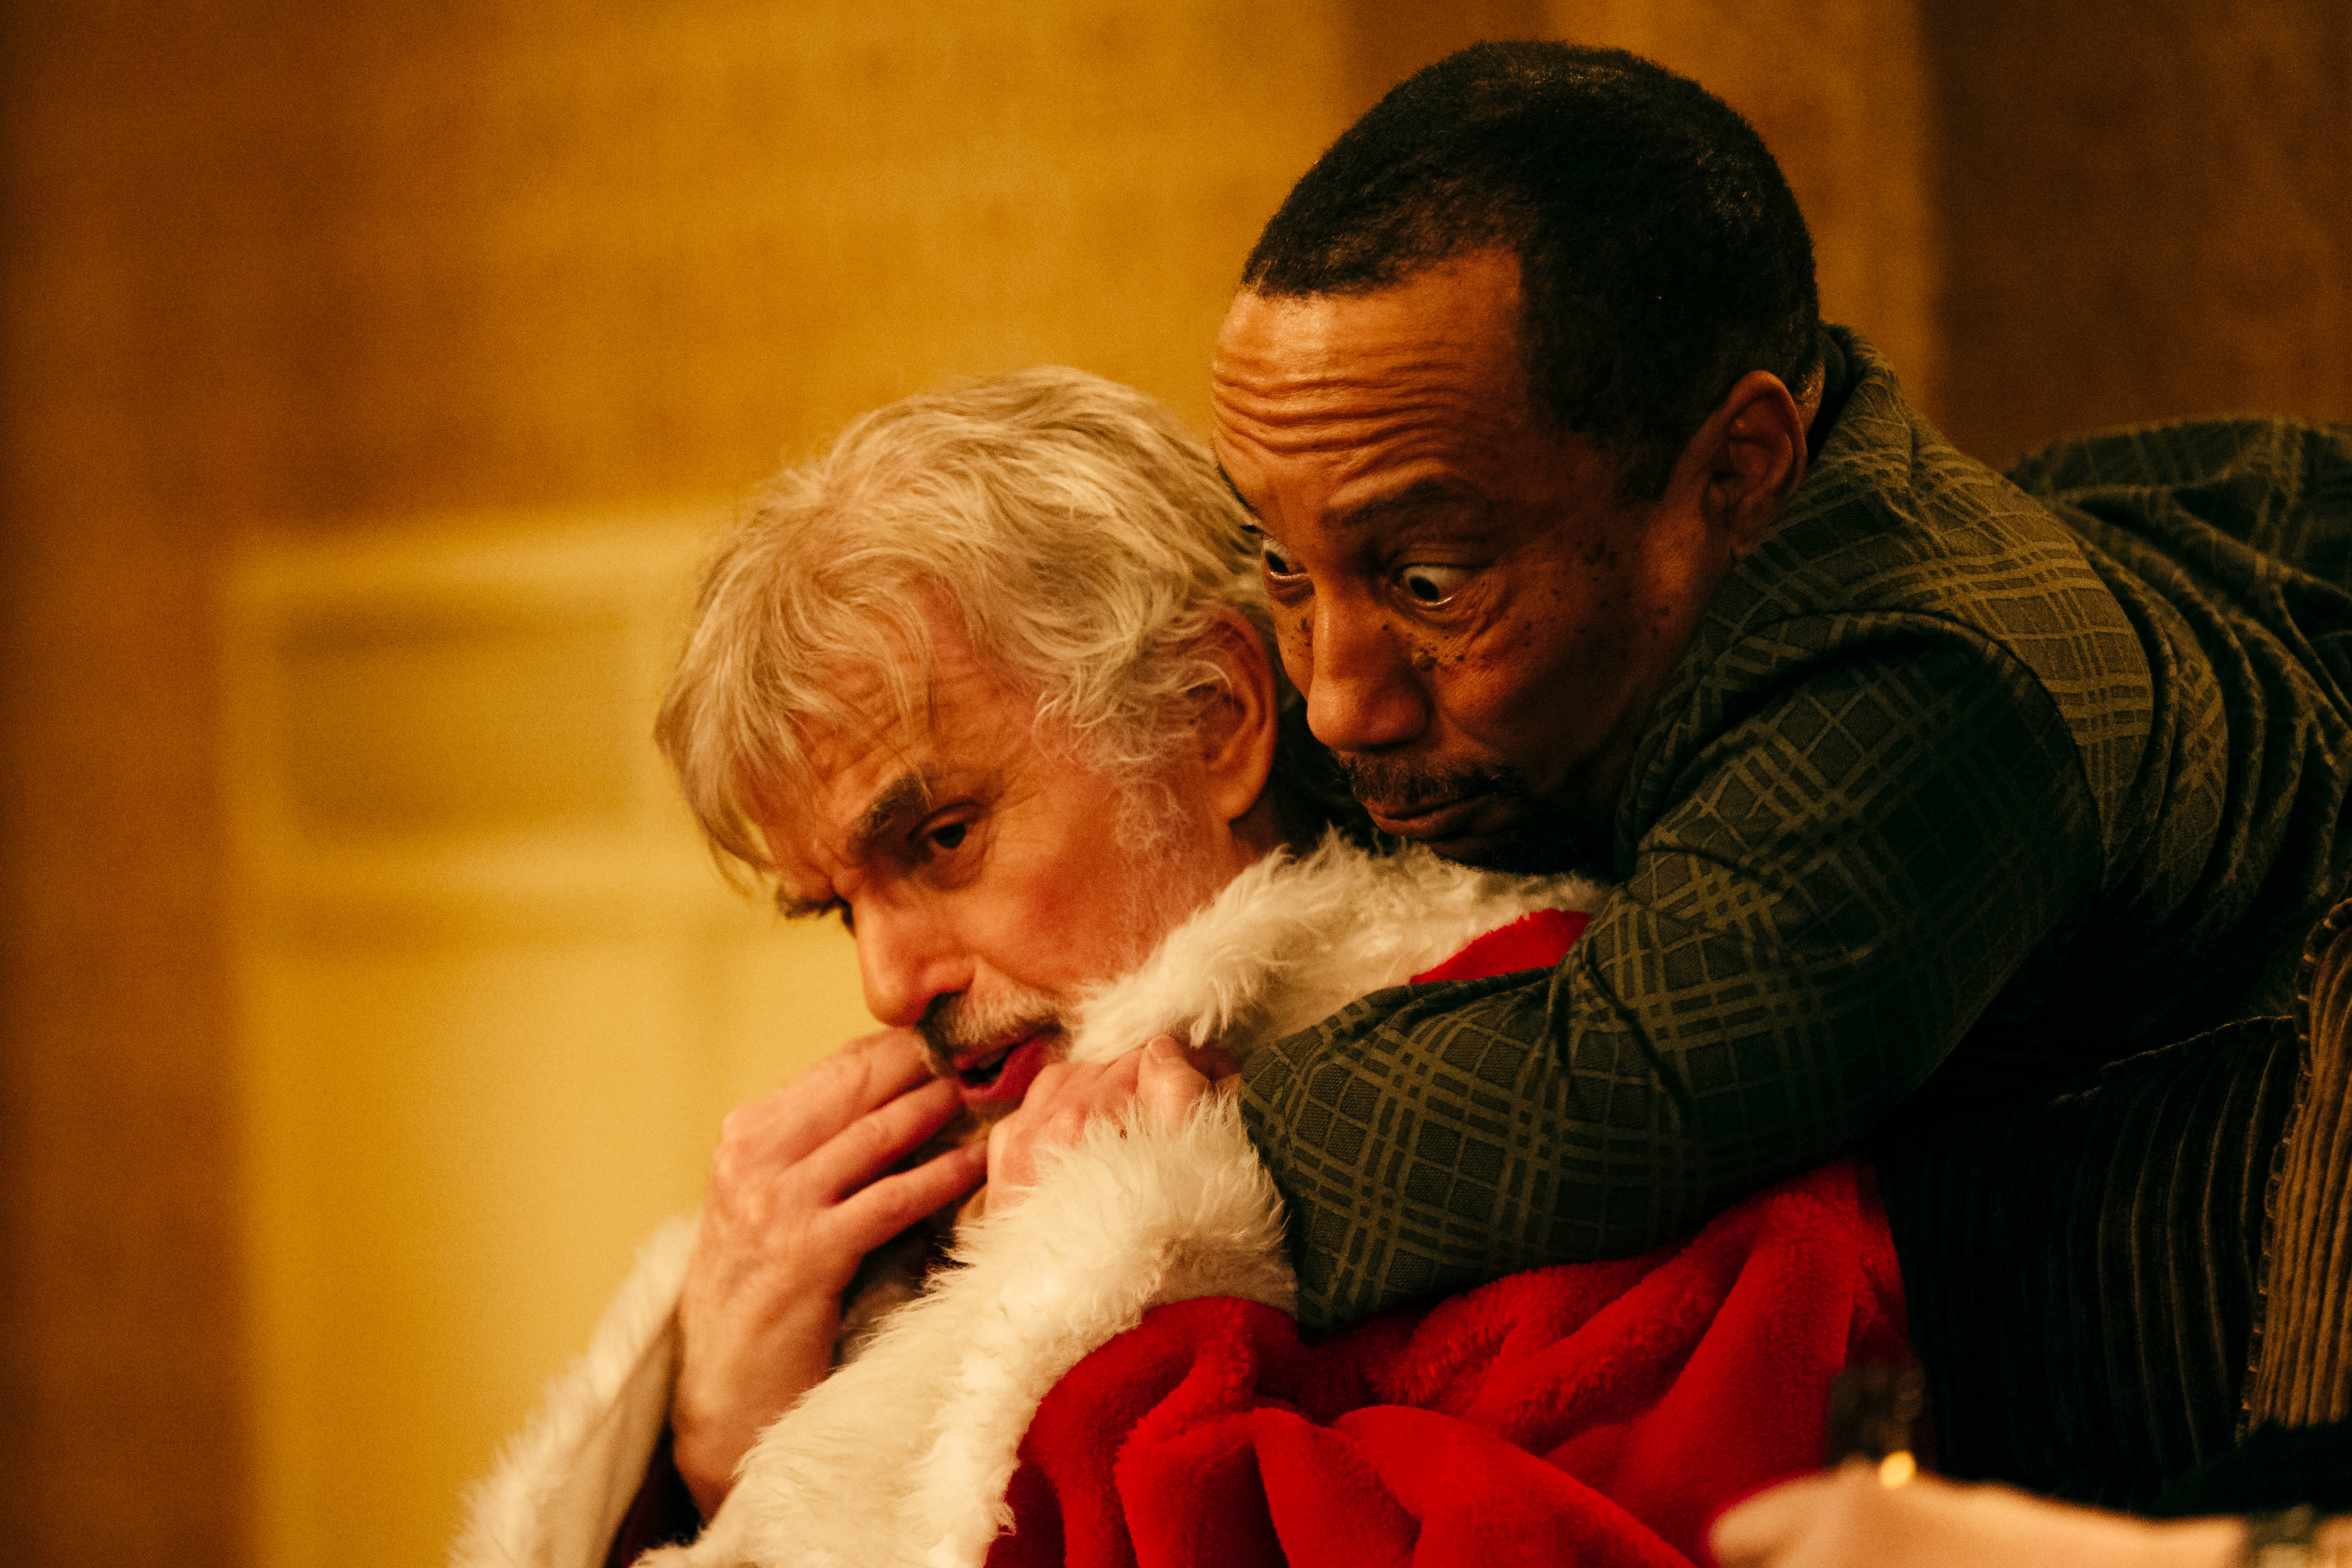 BS2-17603_CROP (l-r) Billy Bob Thornton stars as Willie Soke and Tony Cox as Marcus Skidmore in BAD SANTA 2, a Broad Green Pictures release. Credit: Jan Thijs / Broad Green Pictures